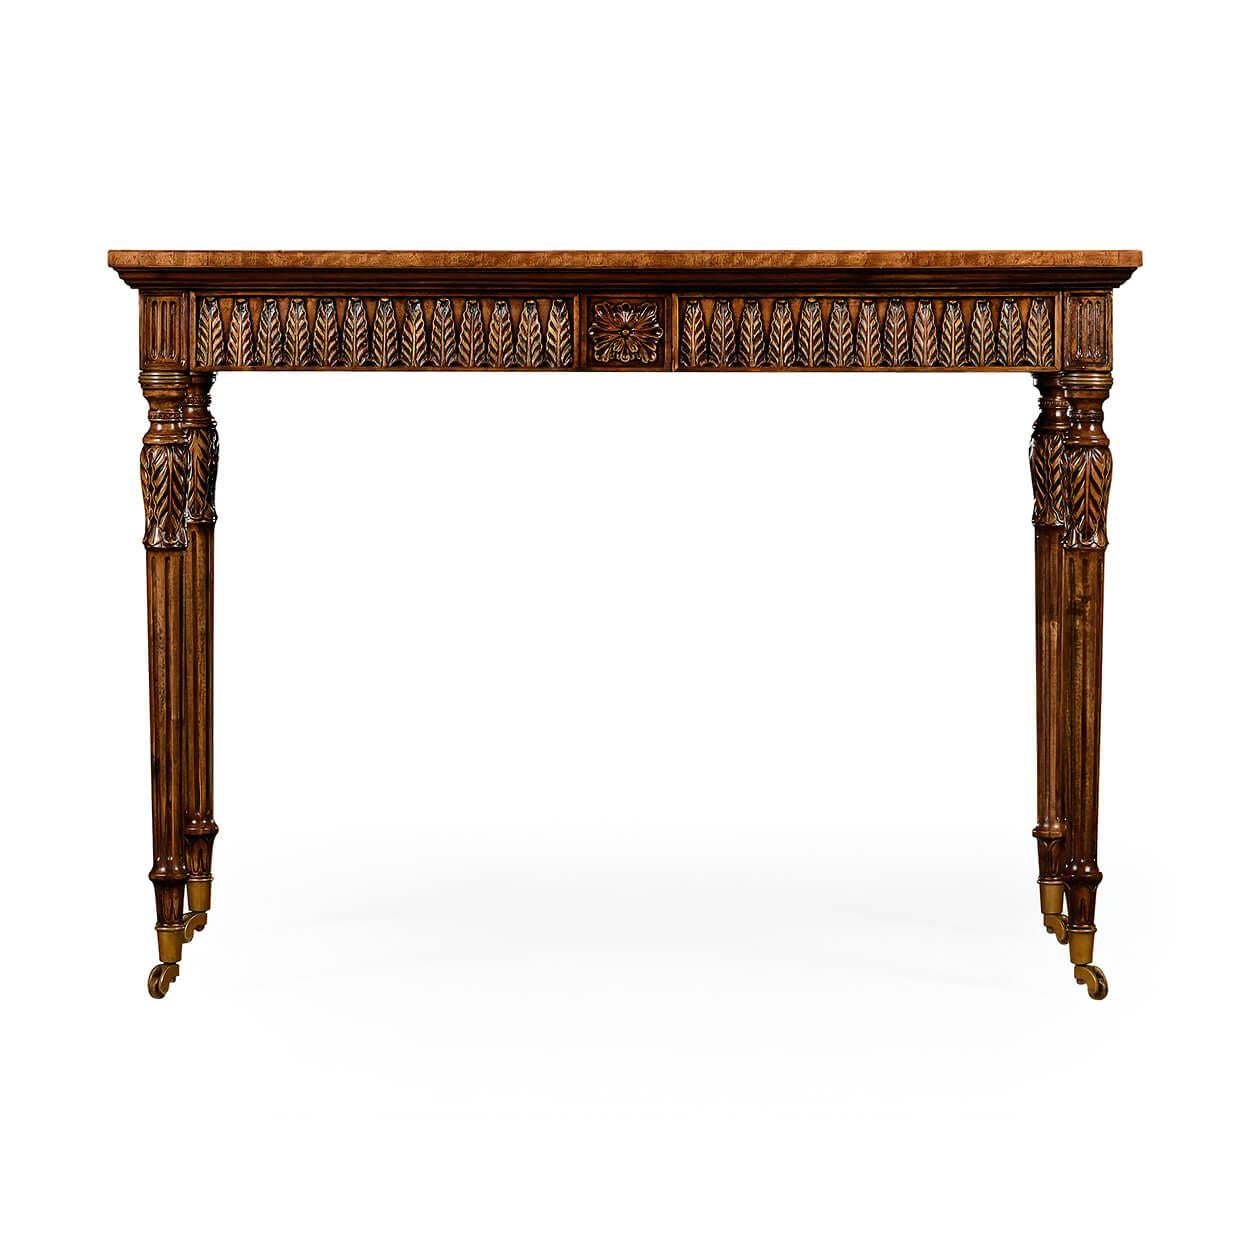 A fine French neoclassic carved and inlaid top writing table. With a beautifully inlaid parquetry banded top, finely carved palmettes motifs to sides, acanthus carved and wrapped turned, tapered and fluted legs with brass capitals and brass casters.